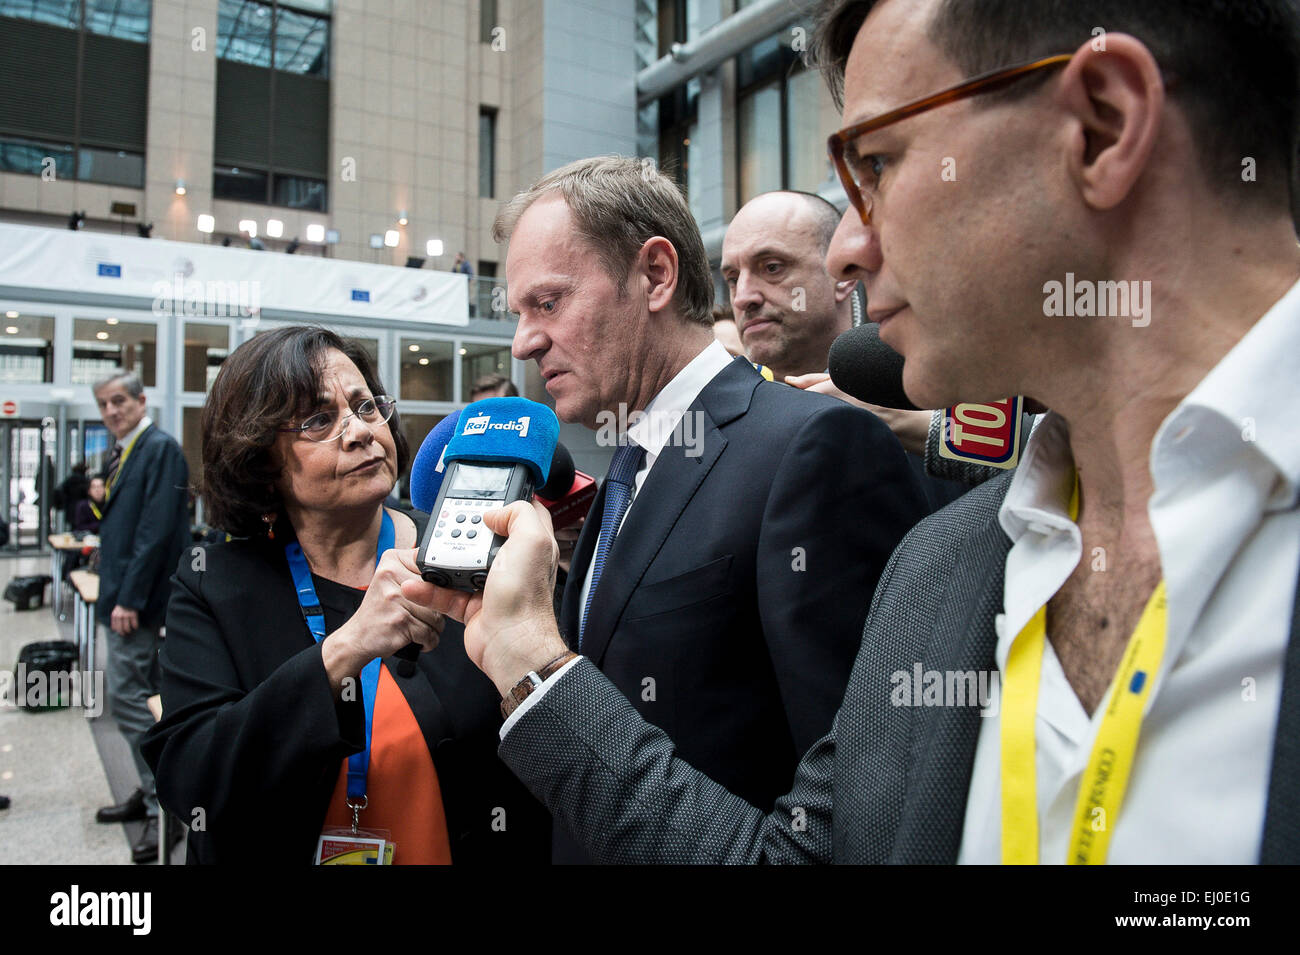 Brussels, Bxl, Belgium. 19th Mar, 2015. Donald Tusk, the president of the European Council arrive to the press conference ahead of the EU Summit in Brussels, Belgium on 19.03.2015 by Wiktor Dabkowski Credit:  Wiktor Dabkowski/ZUMA Wire/Alamy Live News Stock Photo